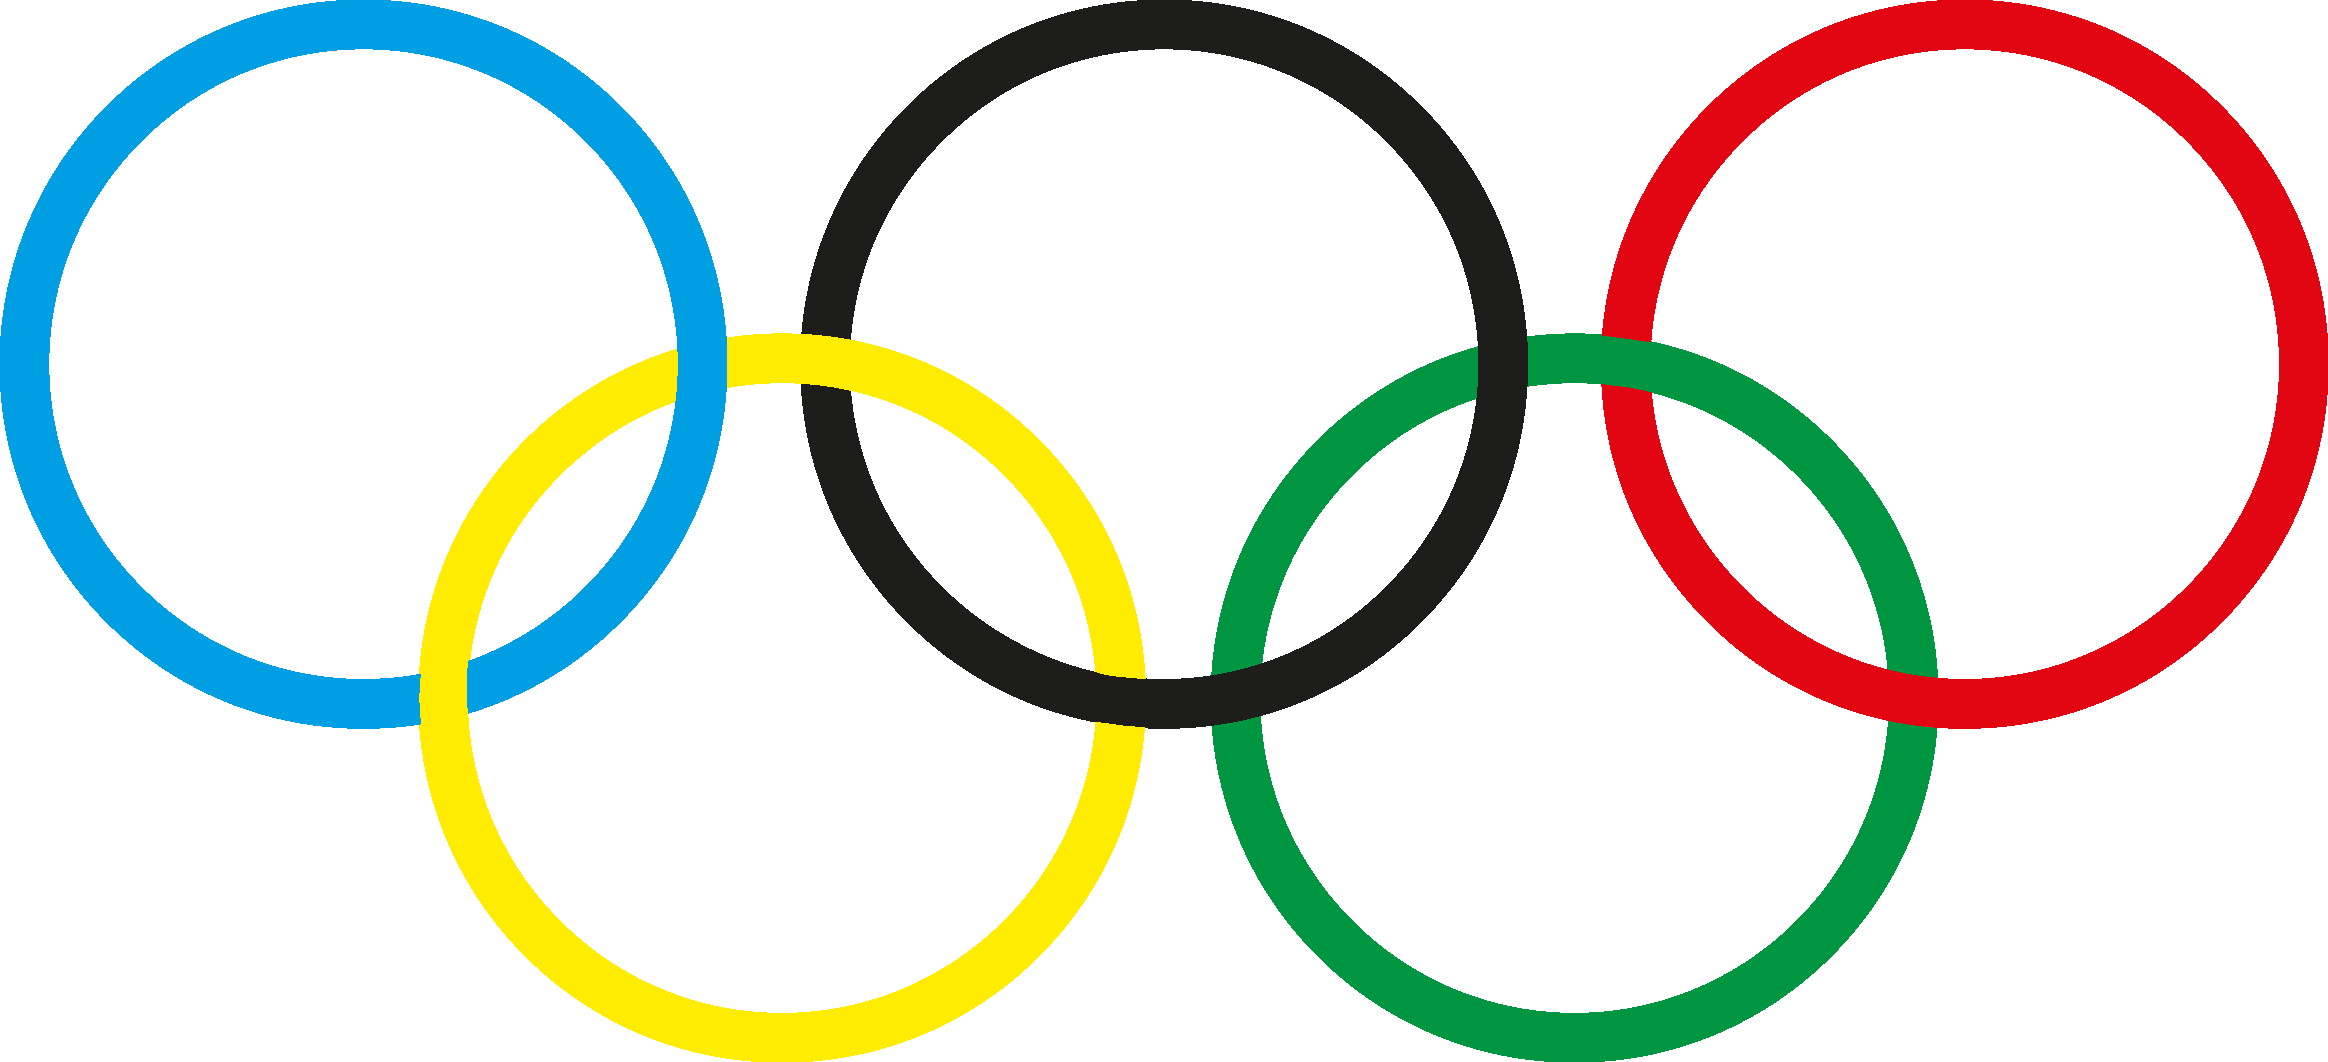 Free Olympics Logo Png, Download Free Olympics Logo Png png images